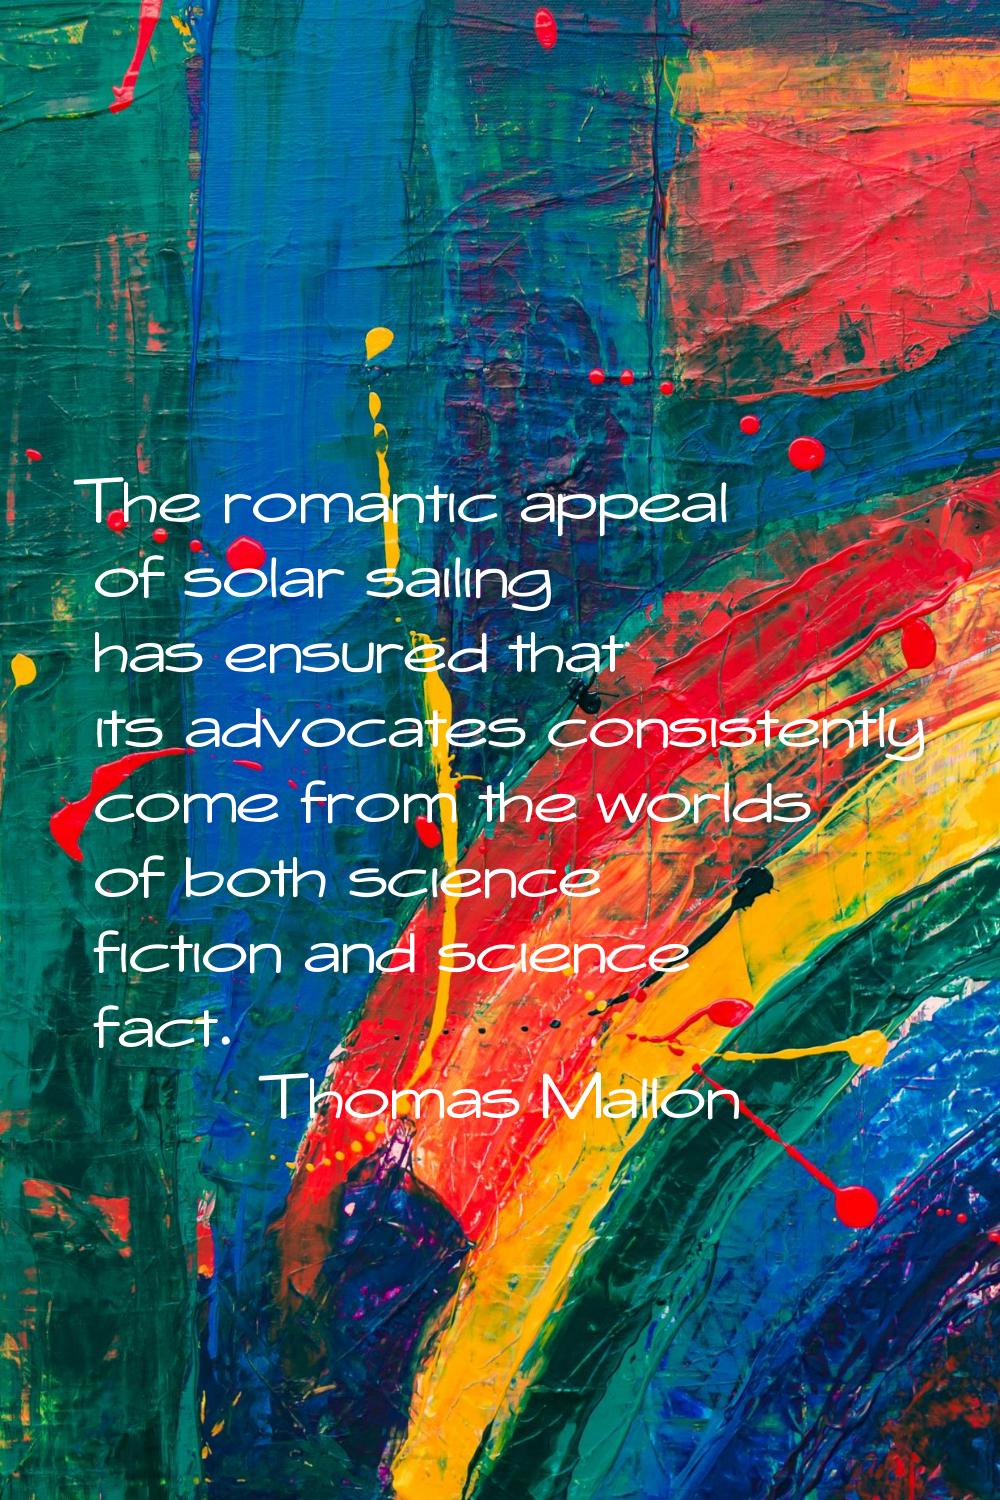 The romantic appeal of solar sailing has ensured that its advocates consistently come from the worl